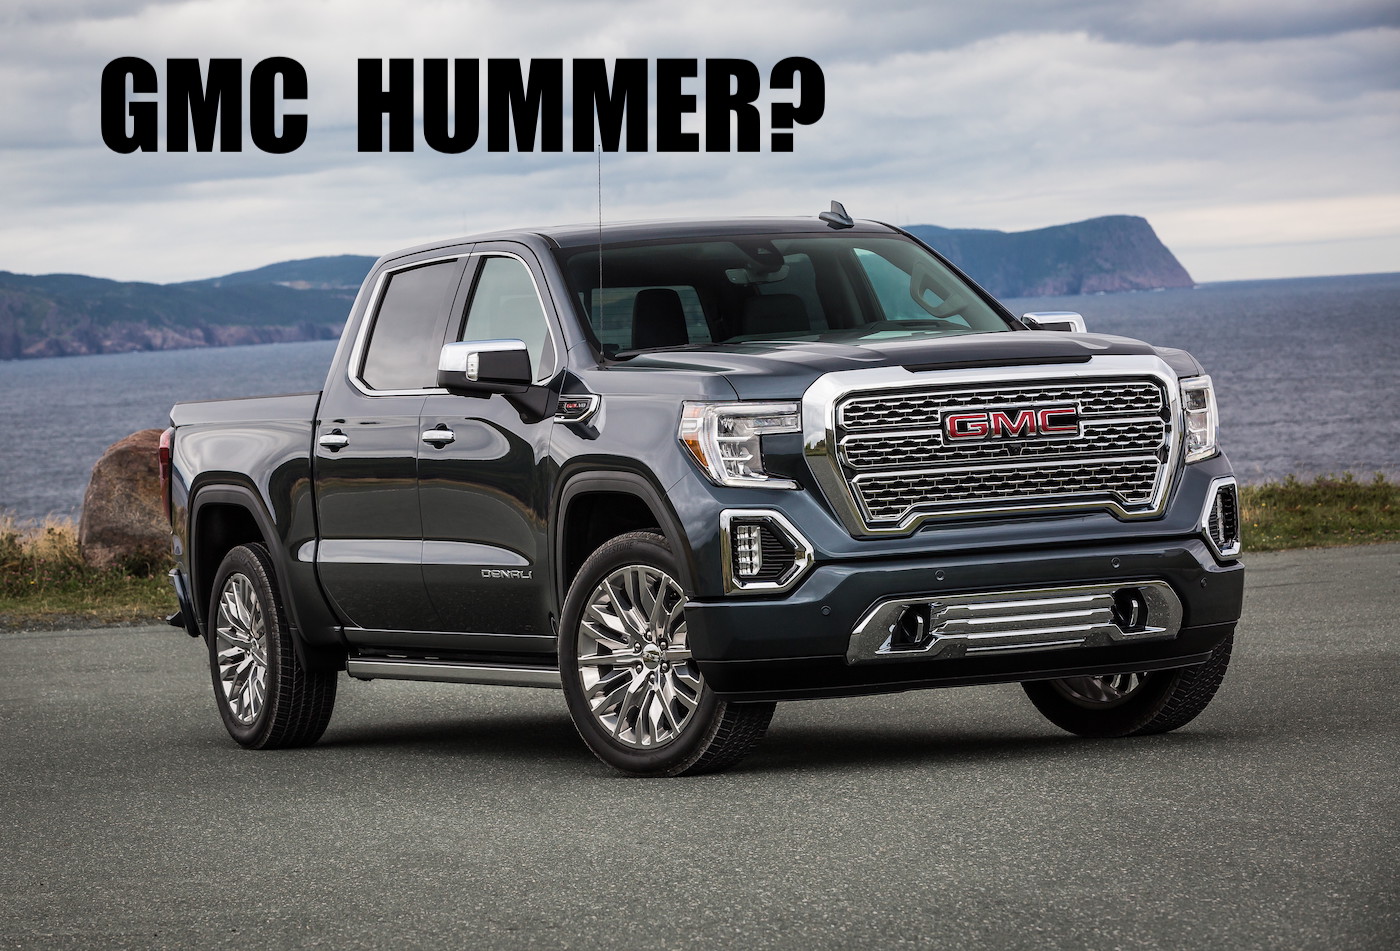 What?! Is Electric 2022 GMC Hummer News Coming During Super Bowl LIV in February 2020 ...